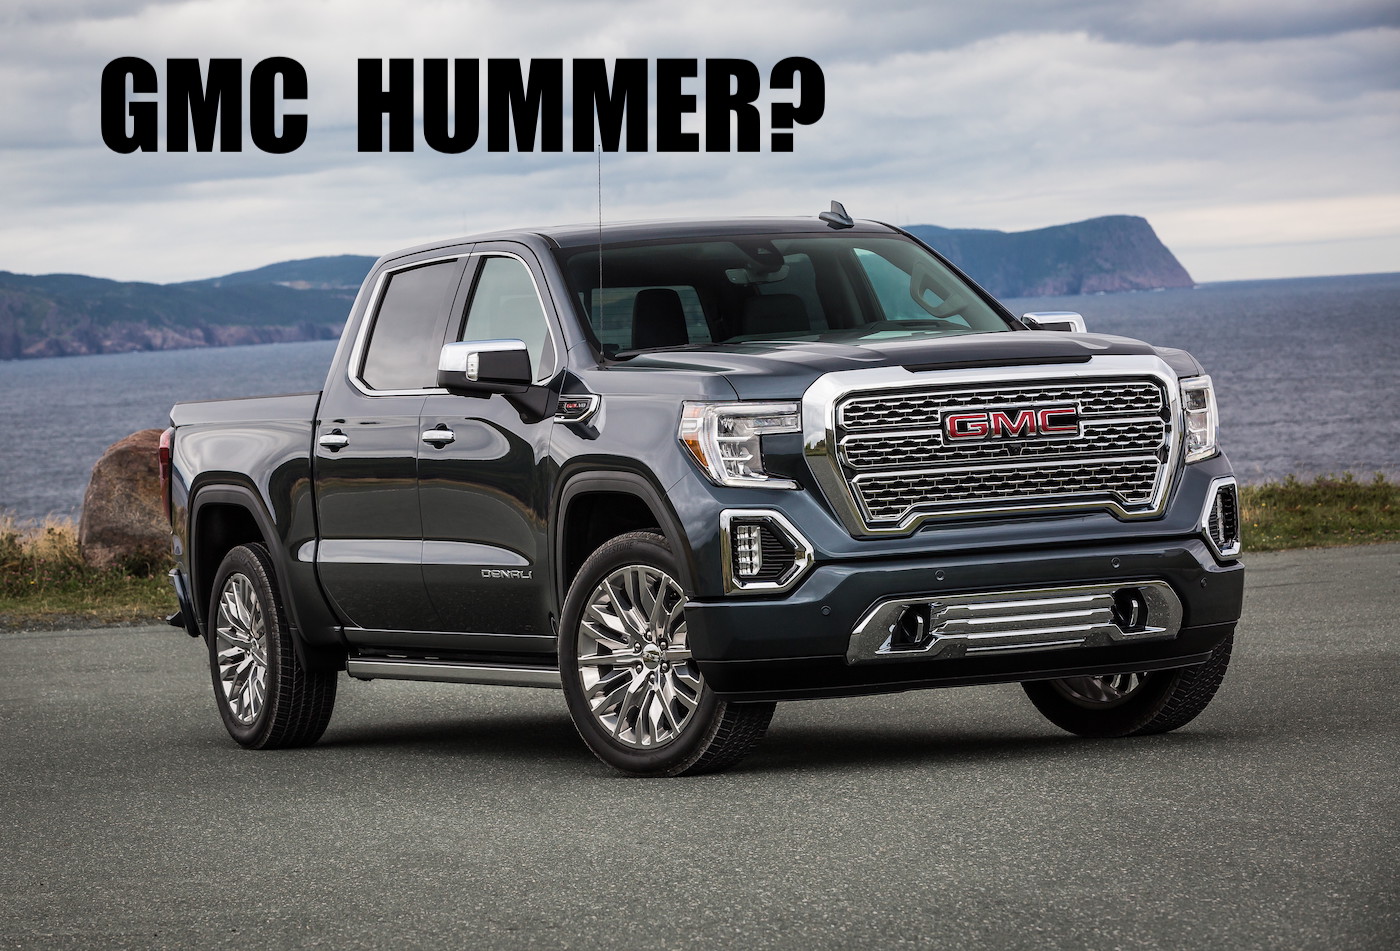 What?! Is Electric 2022 GMC Hummer News Coming During Super Bowl LIV in February 2020 ...